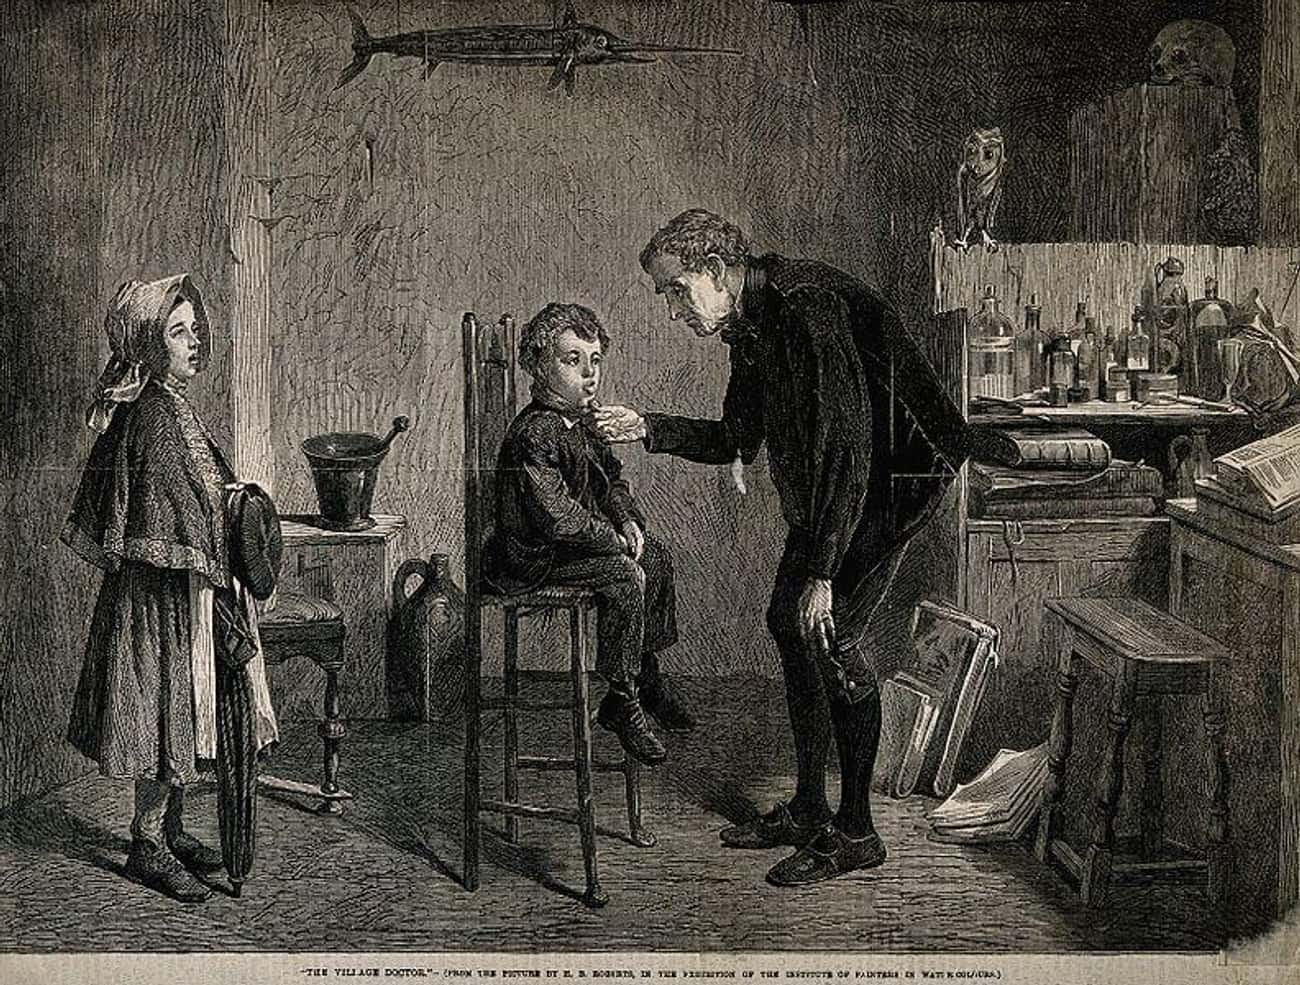 Performing A Tongue Resection For Stuttering Was Popular Through The 1840s